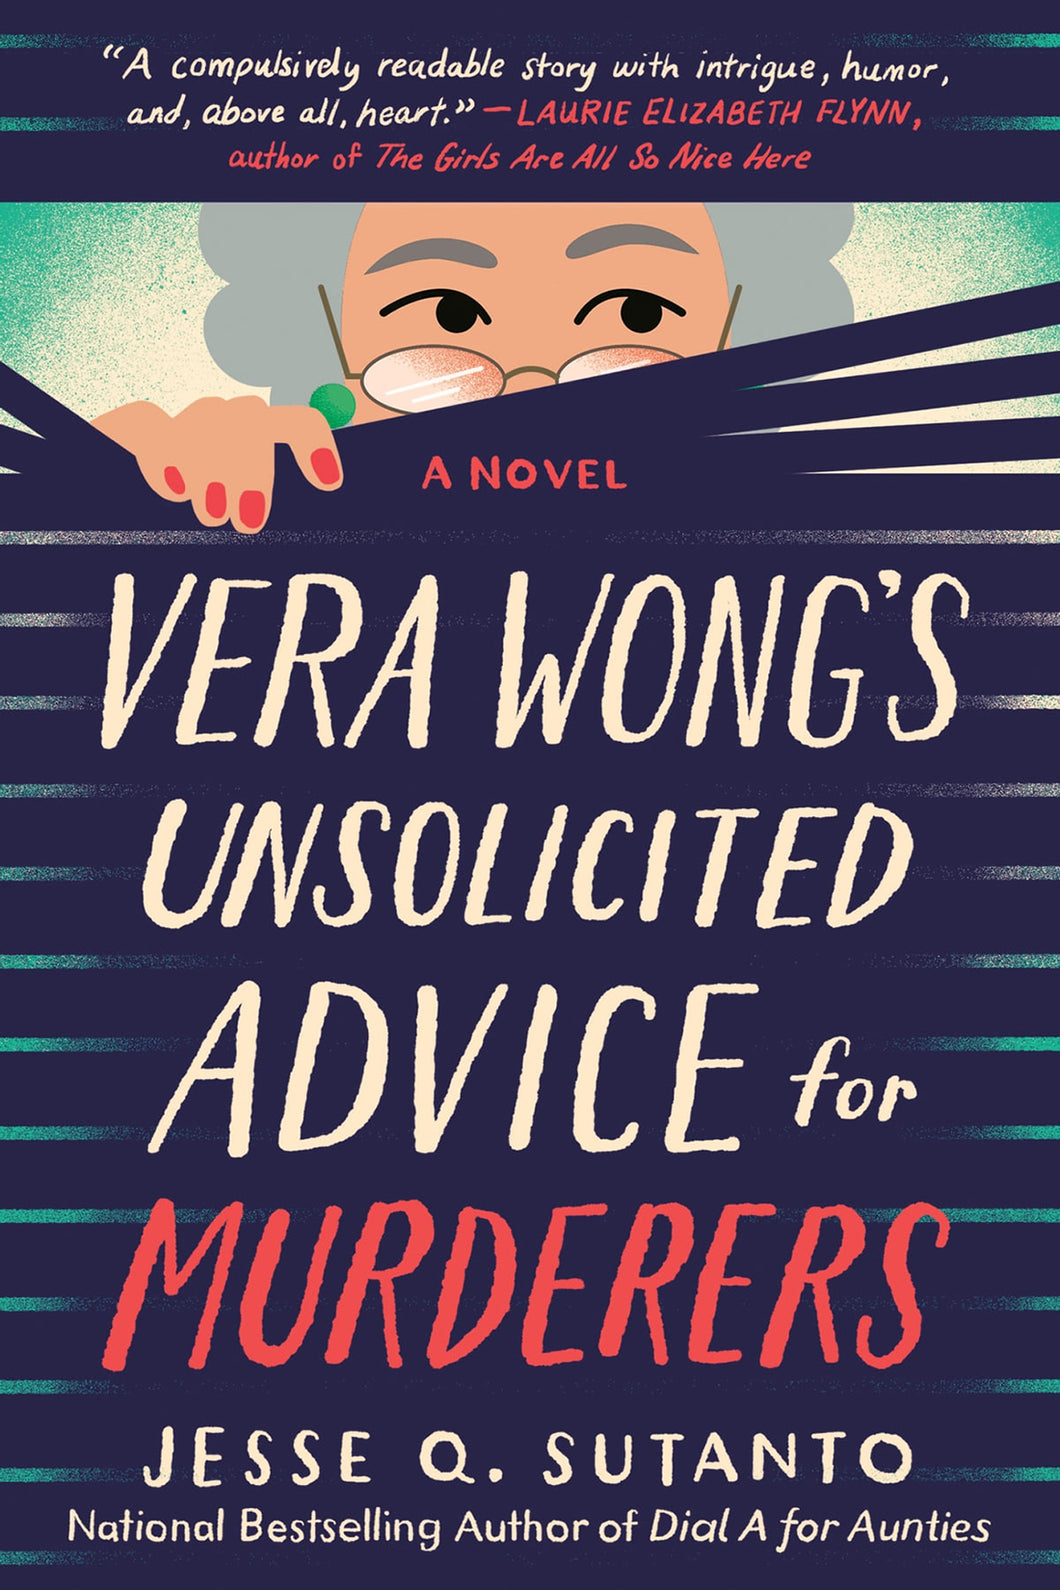 Vera Wong's Unsolicited Advice for Murderers by Jesse Q. Sutanto / BOOK OR BUNDLE - Starting at $17!